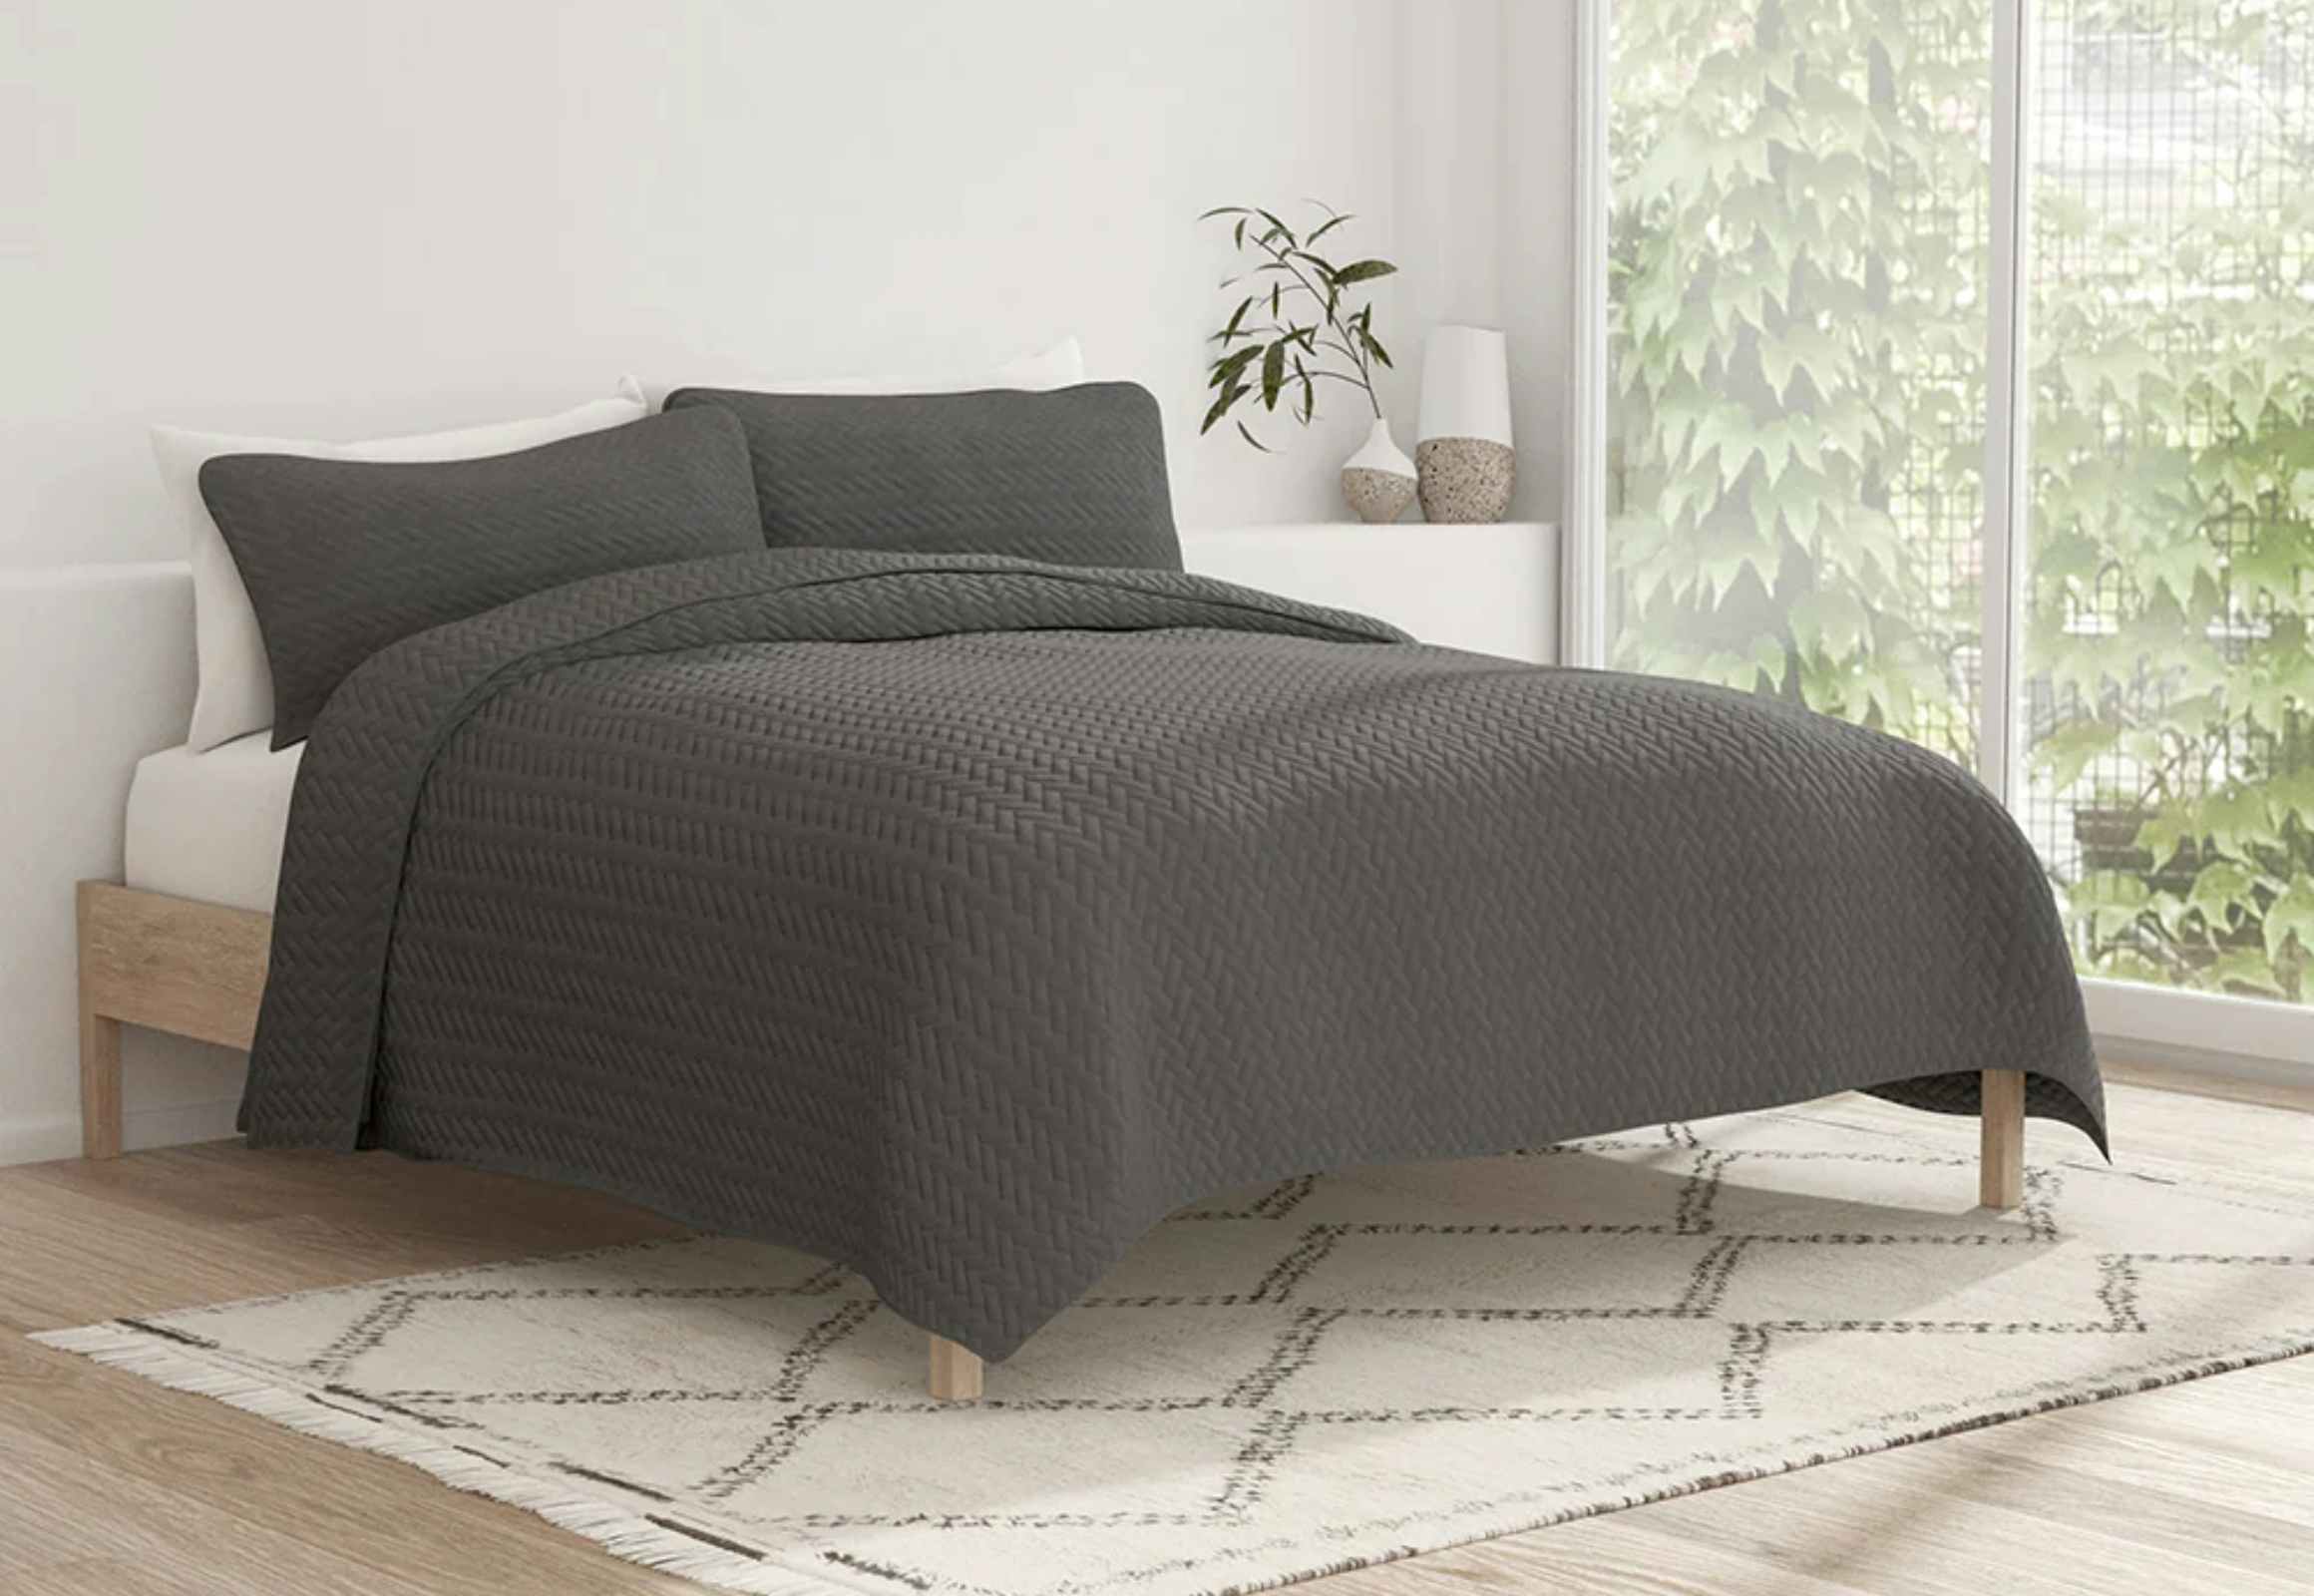 3-Piece Quilt Sets, Starting at $30.80 at Linens & Hutch